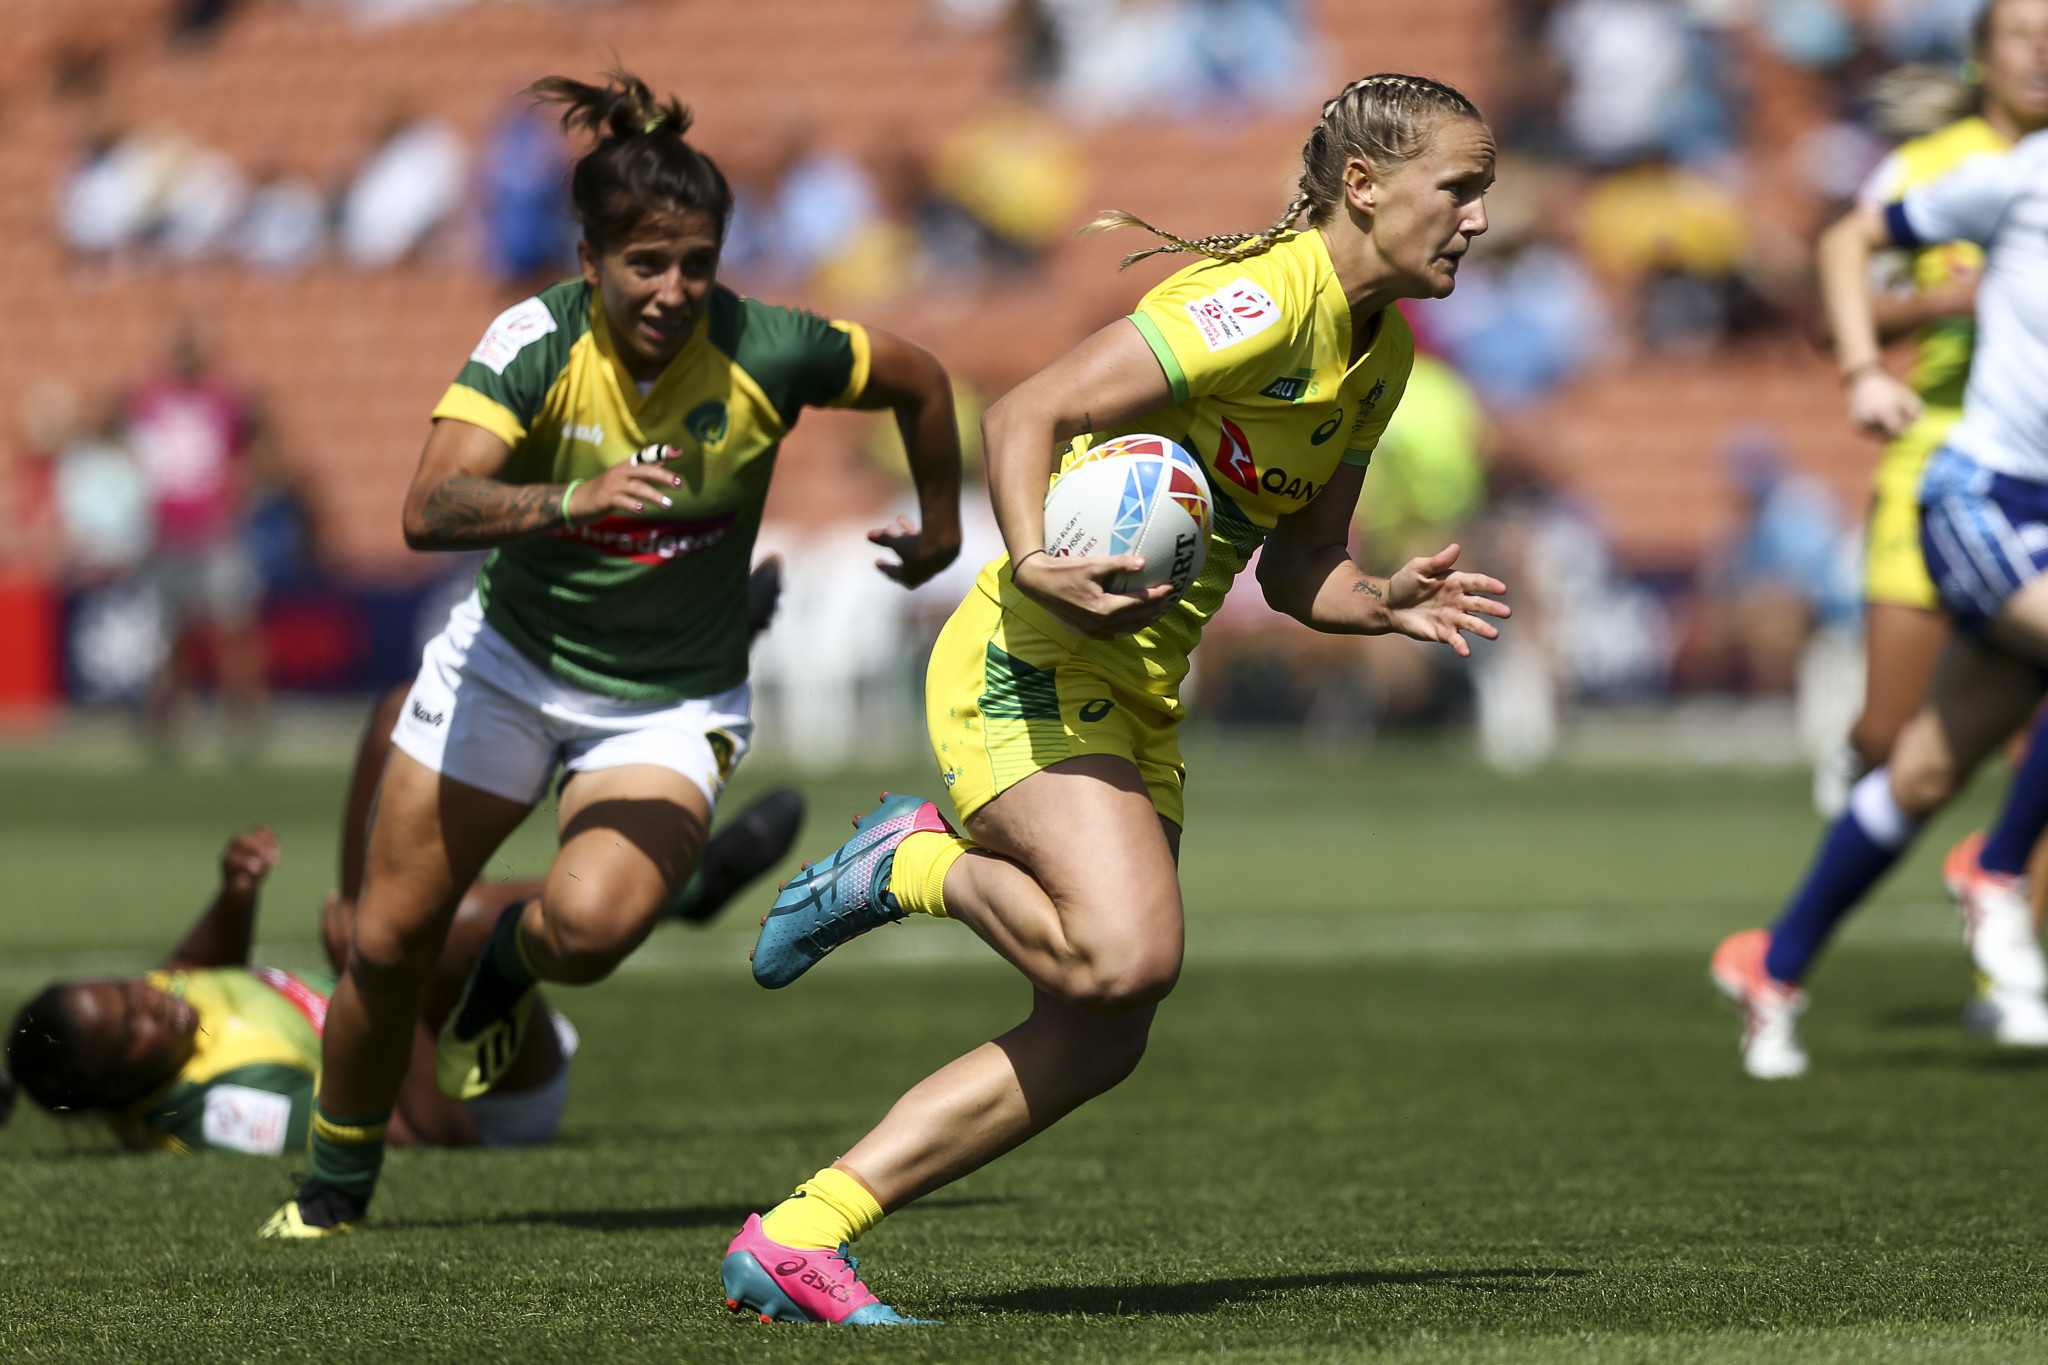 Australia defeated Brazil in Pool B at the World Rugby Women’s Sevens Series in Hamilton ©Getty Images